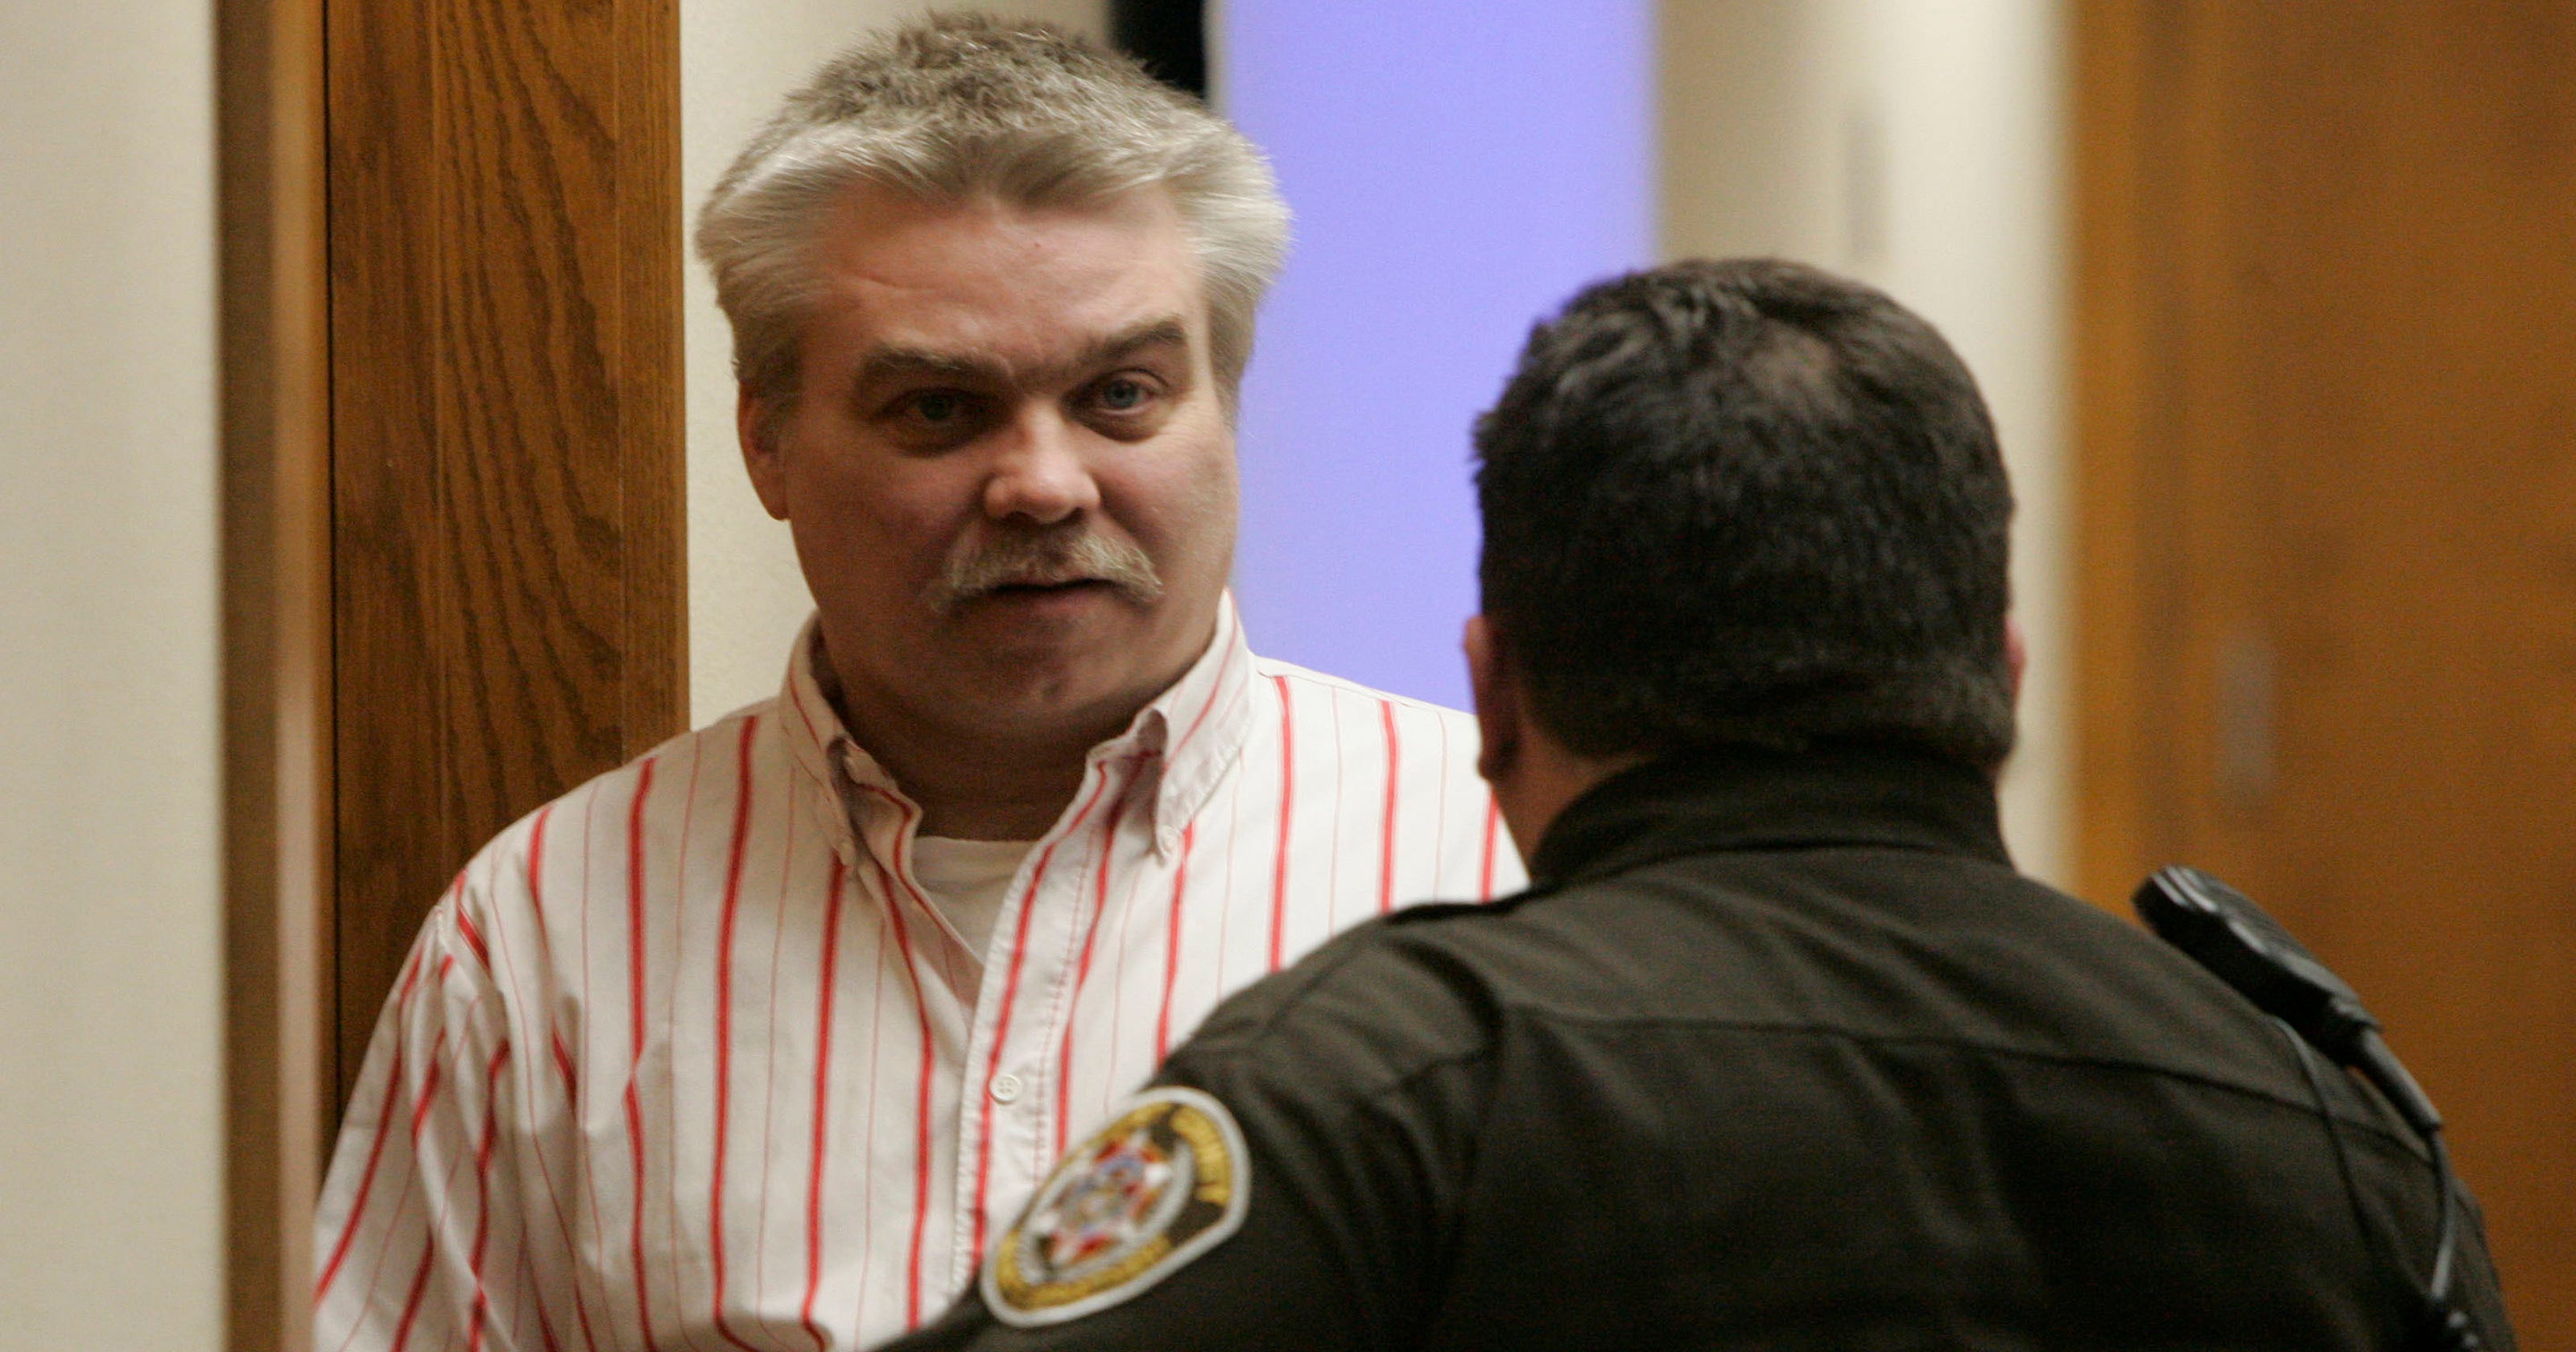 The decision in the Steven Avery case Breaking down the evidence